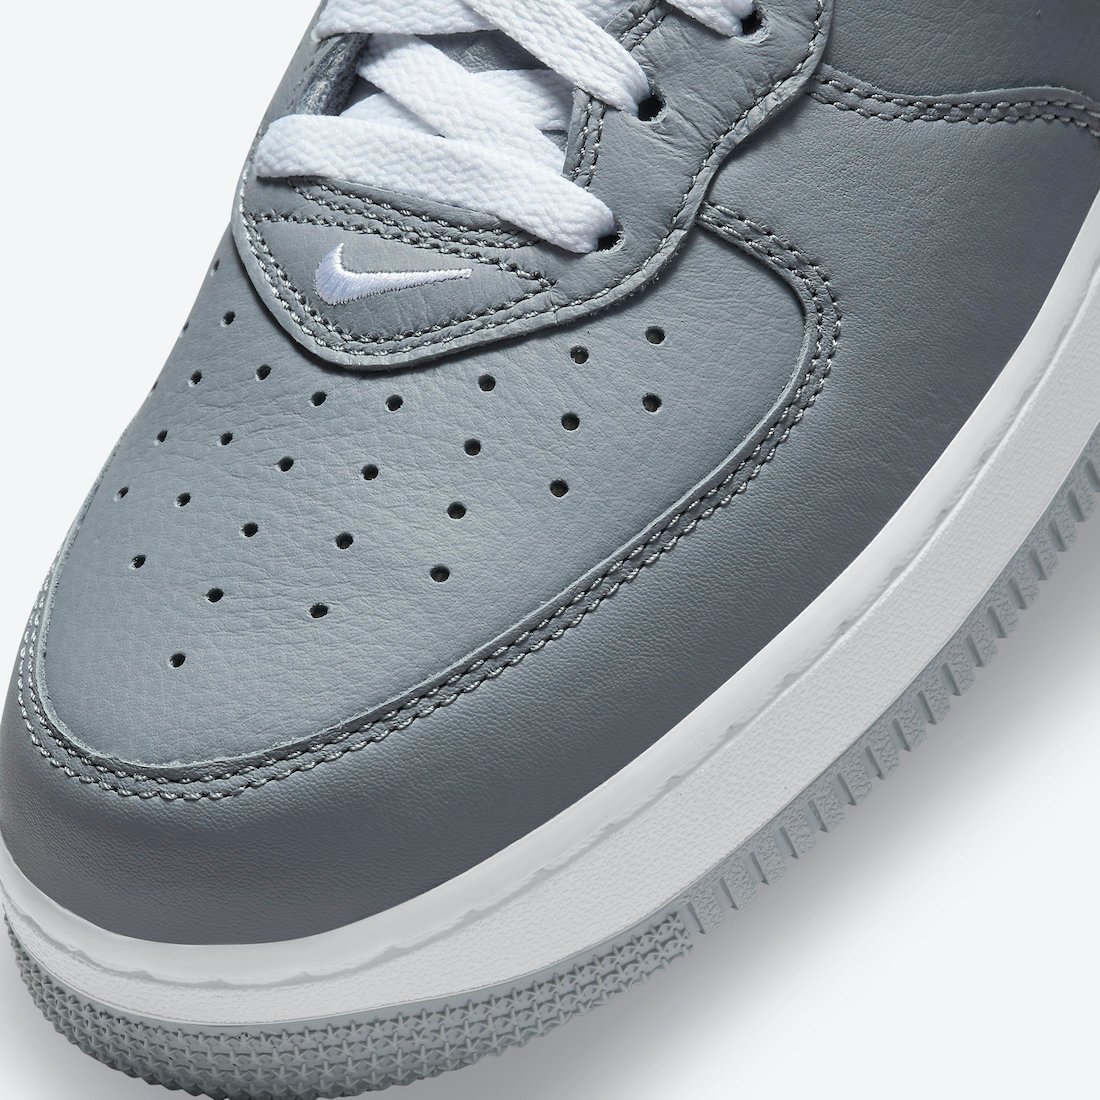 Nike Air Force 1 Mid NYC Cool Grey DH5622-001 Release Date Info